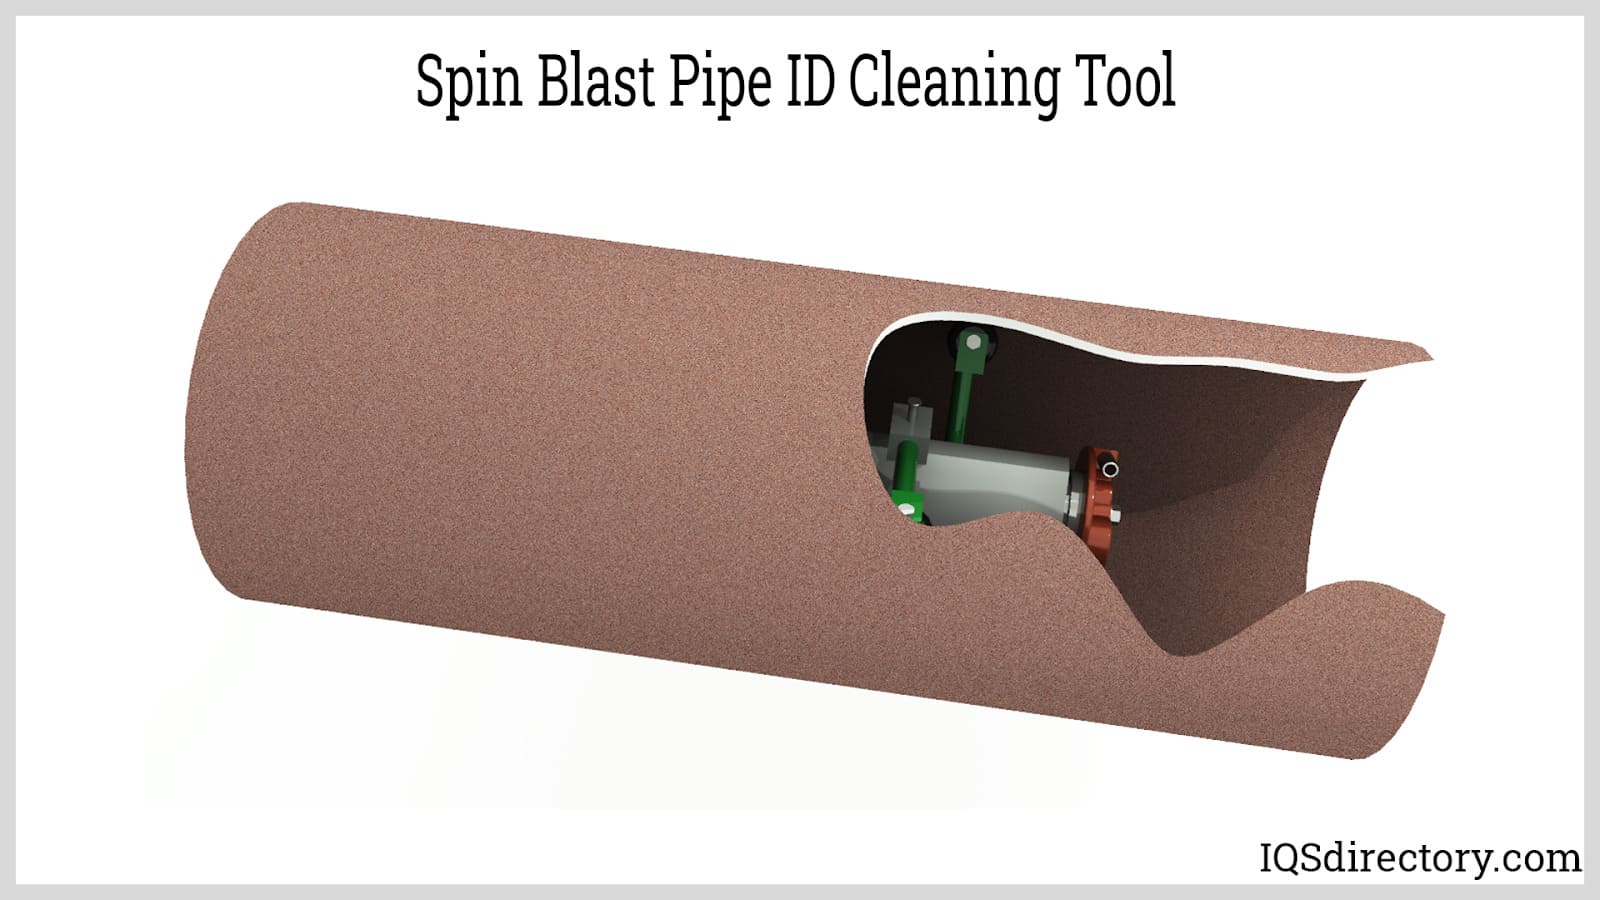 Spin Blast Pipe ID Cleaning Tool